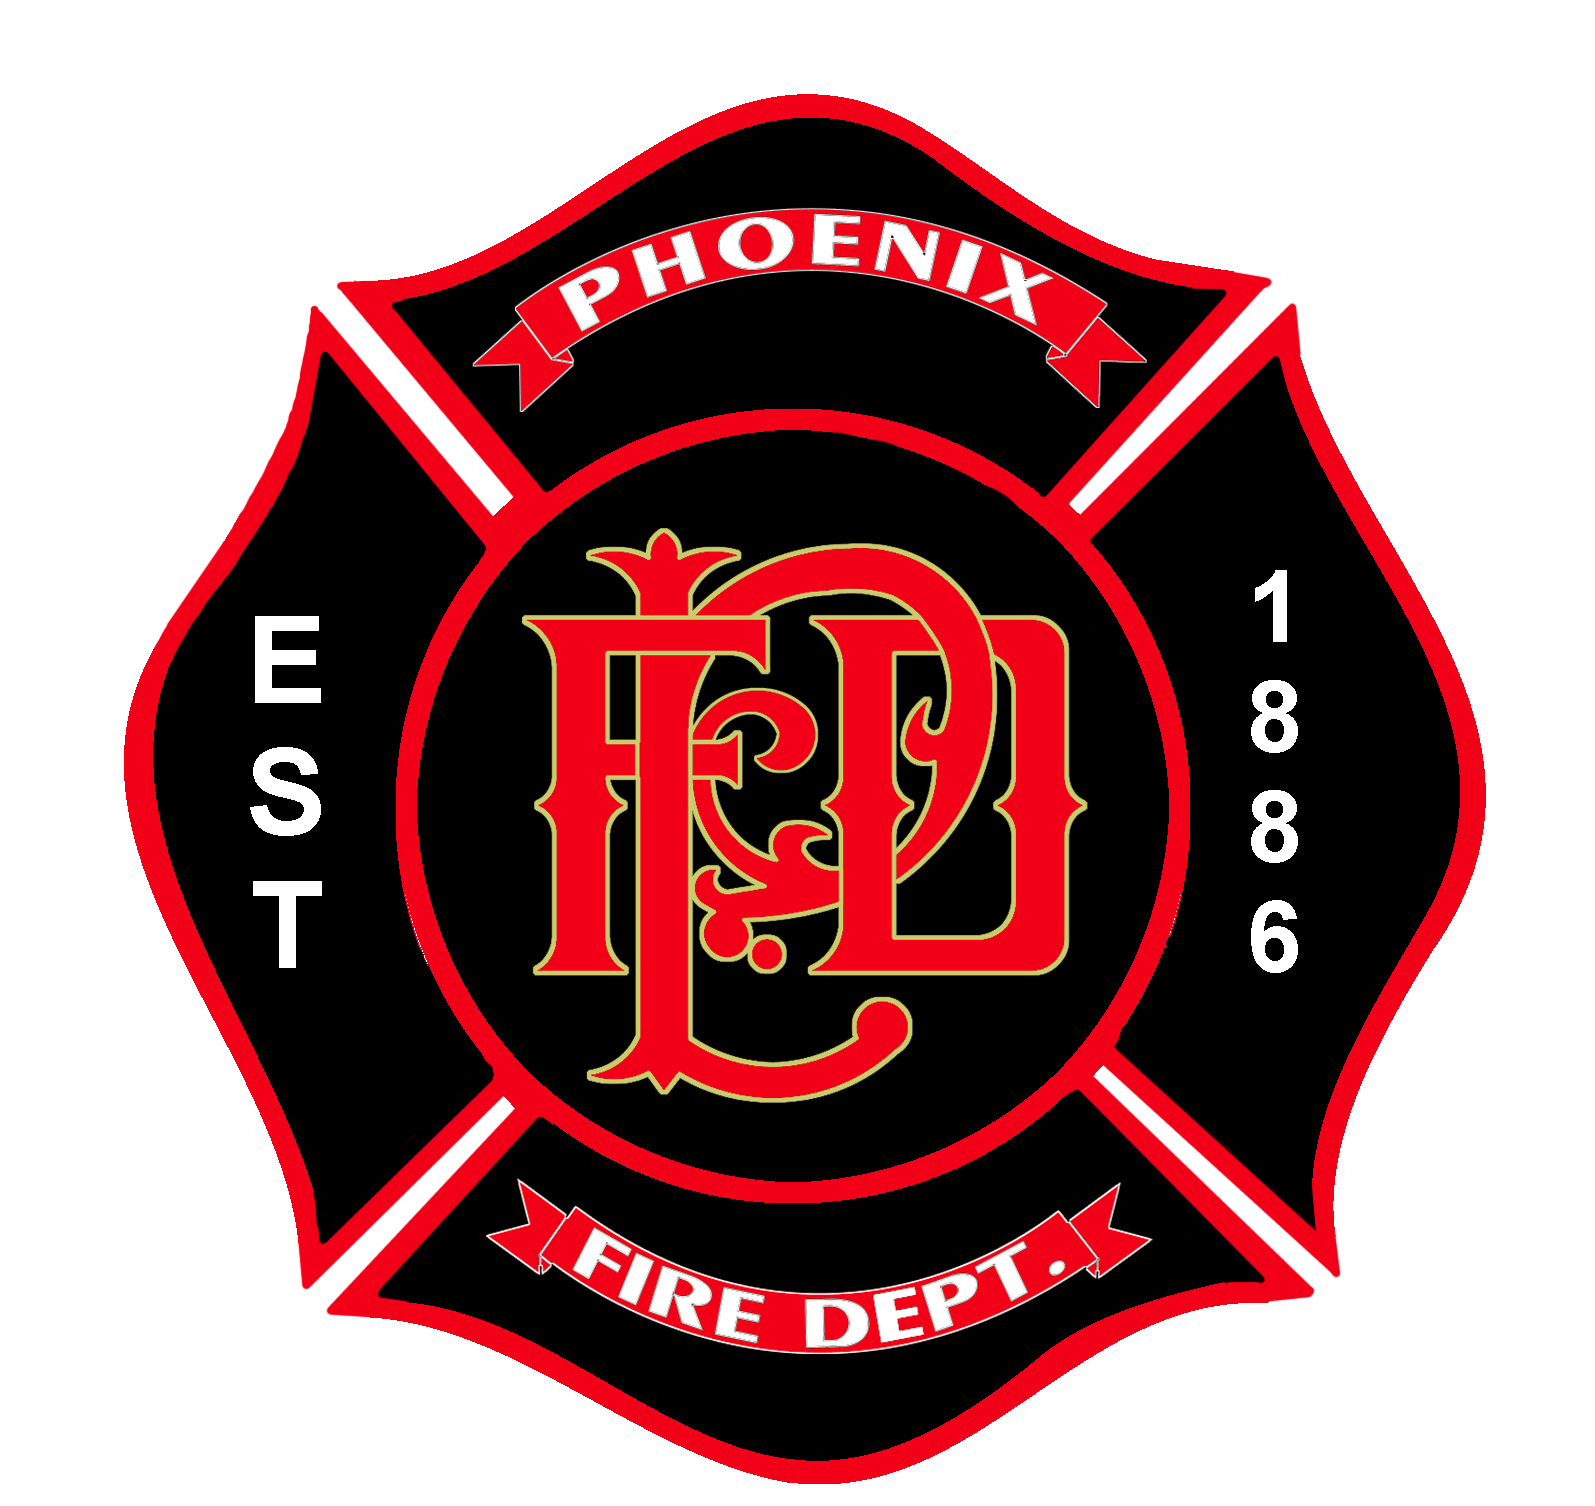 Phoenix fire a supporting community partner with MHCA